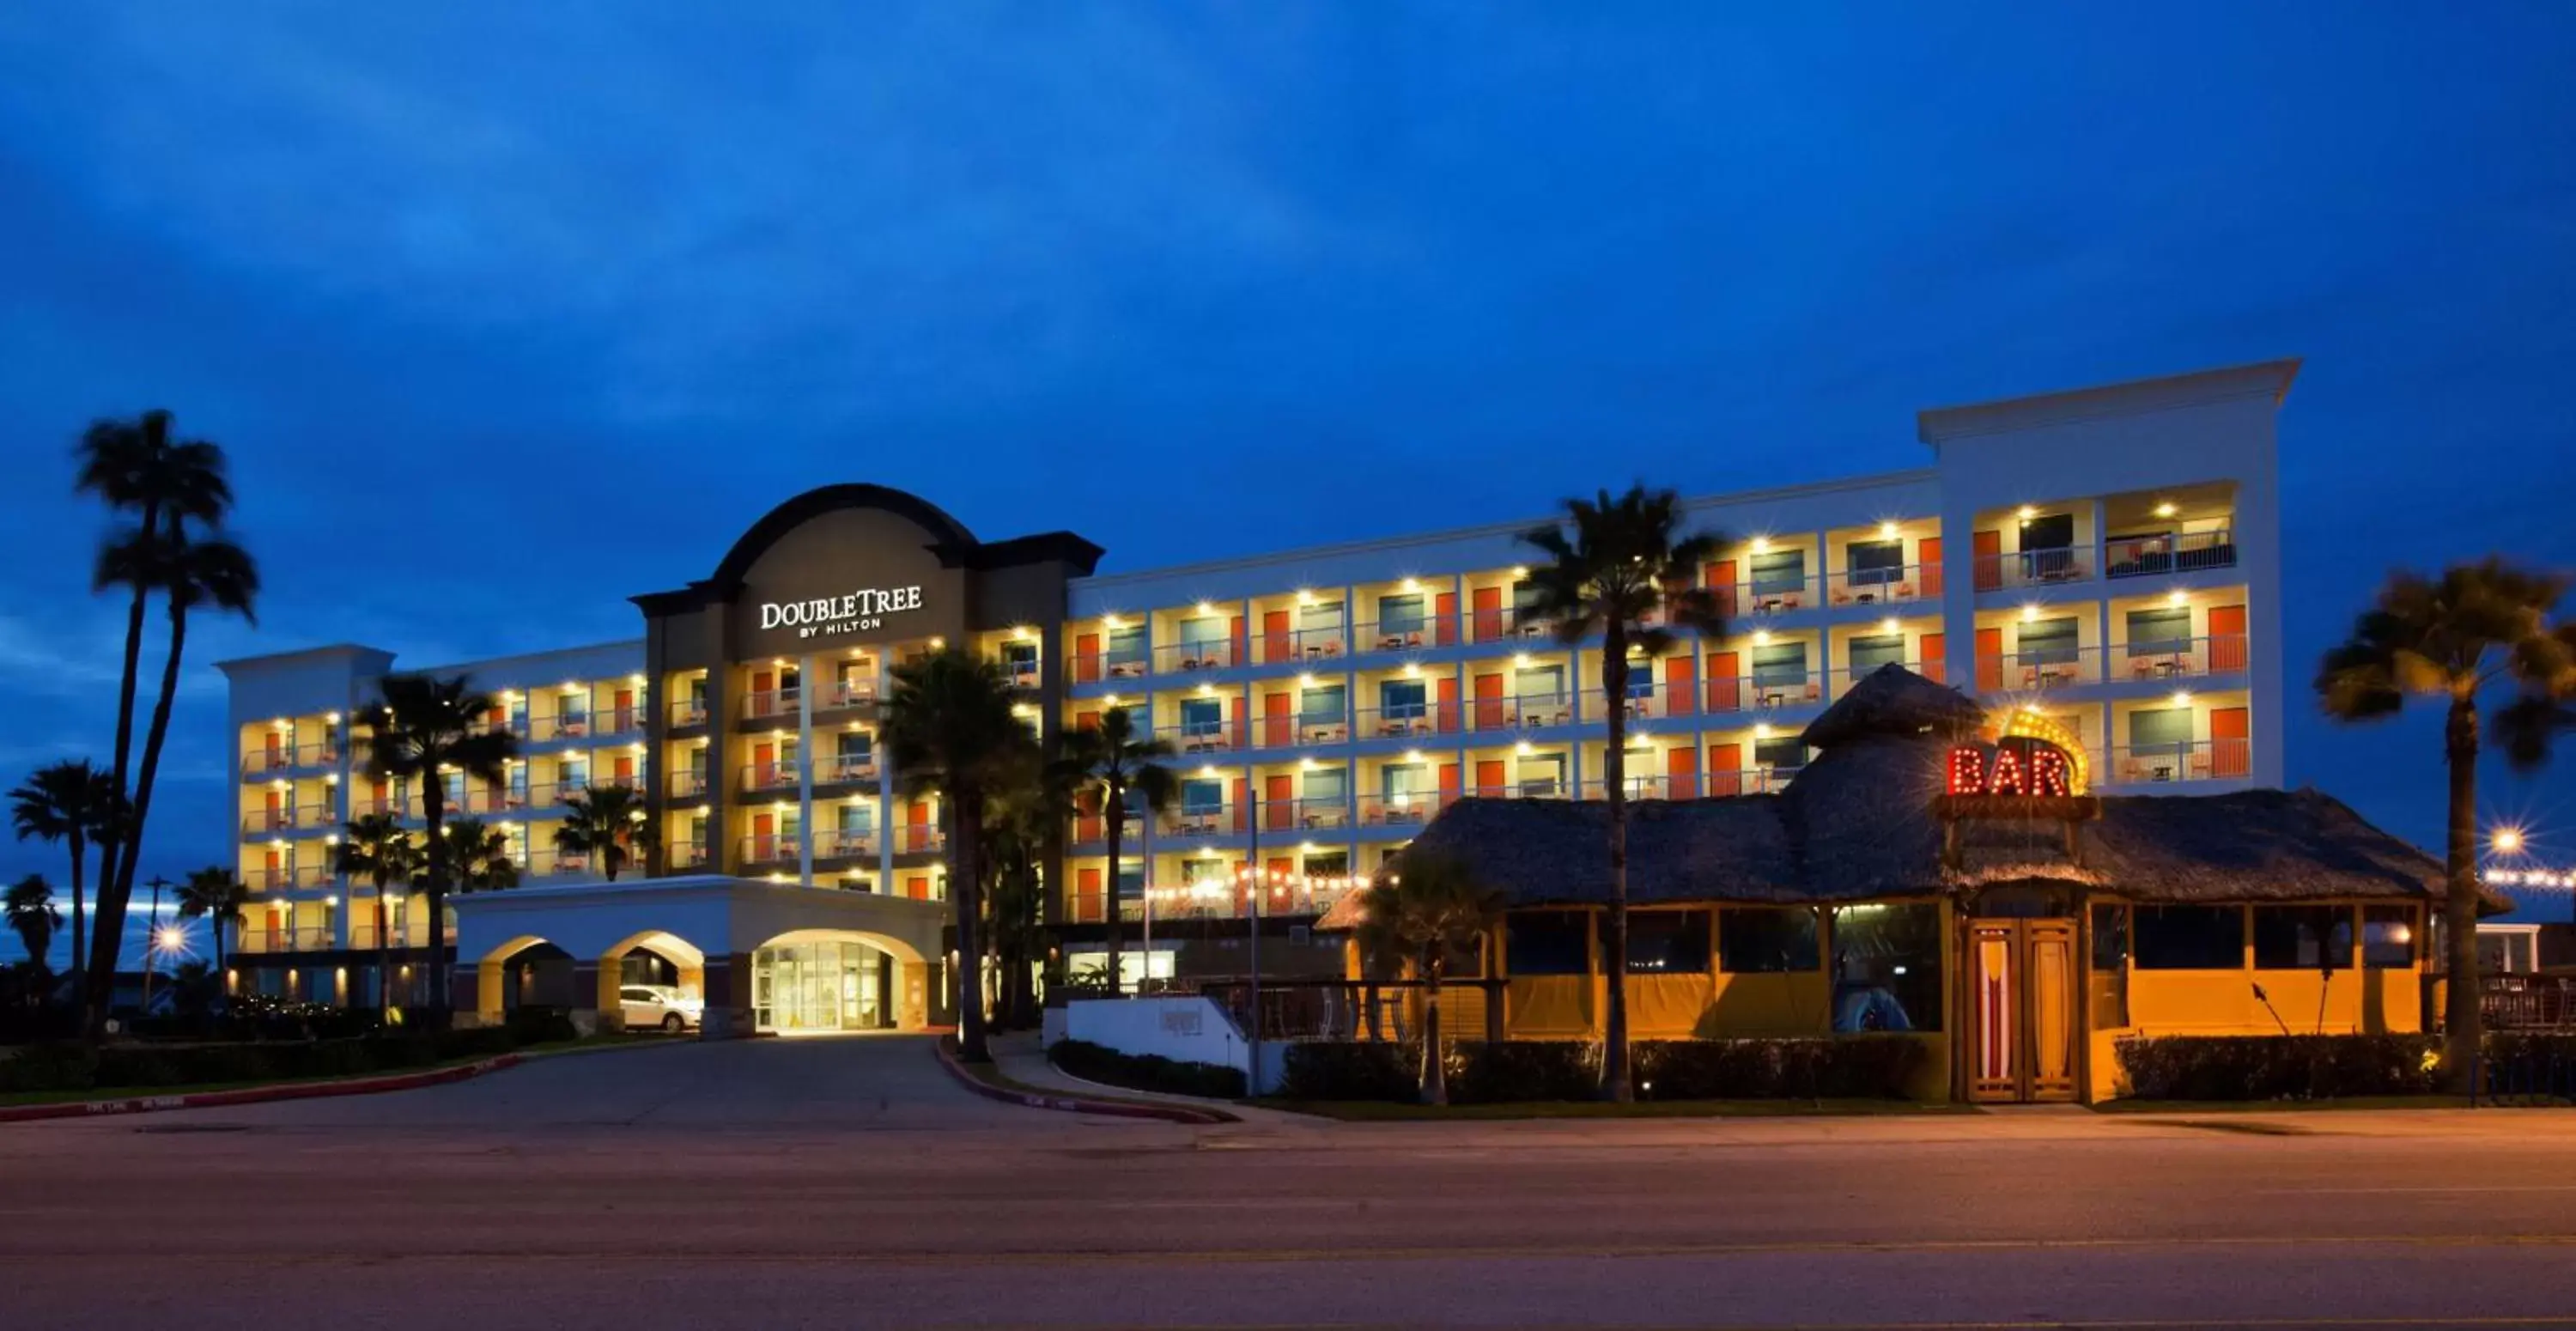 Property Building in DoubleTree by Hilton Galveston Beach